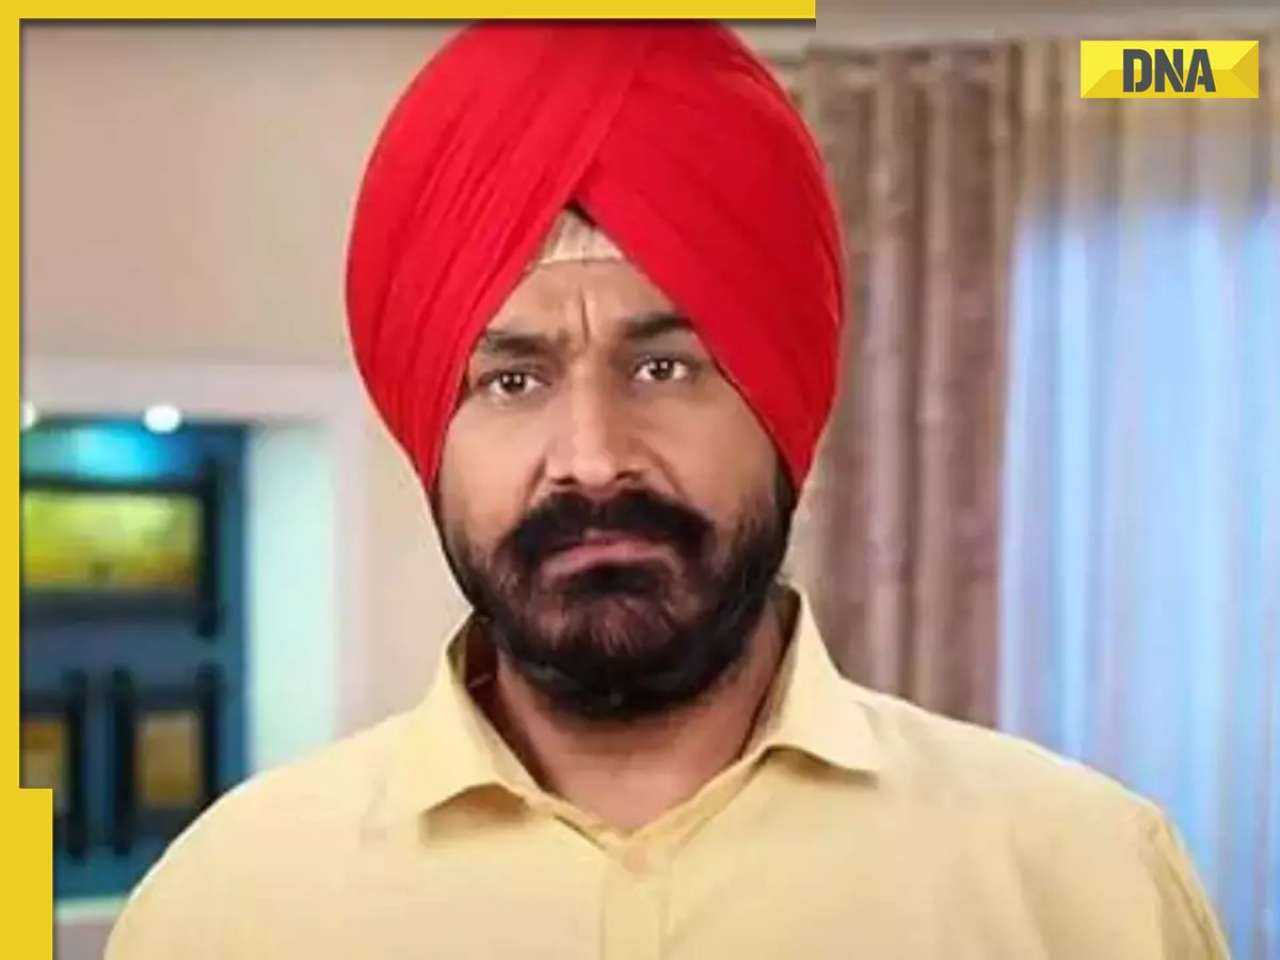 Taarak Mehta's Gurcharan Singh faced financial distress, sources claim he was about to...